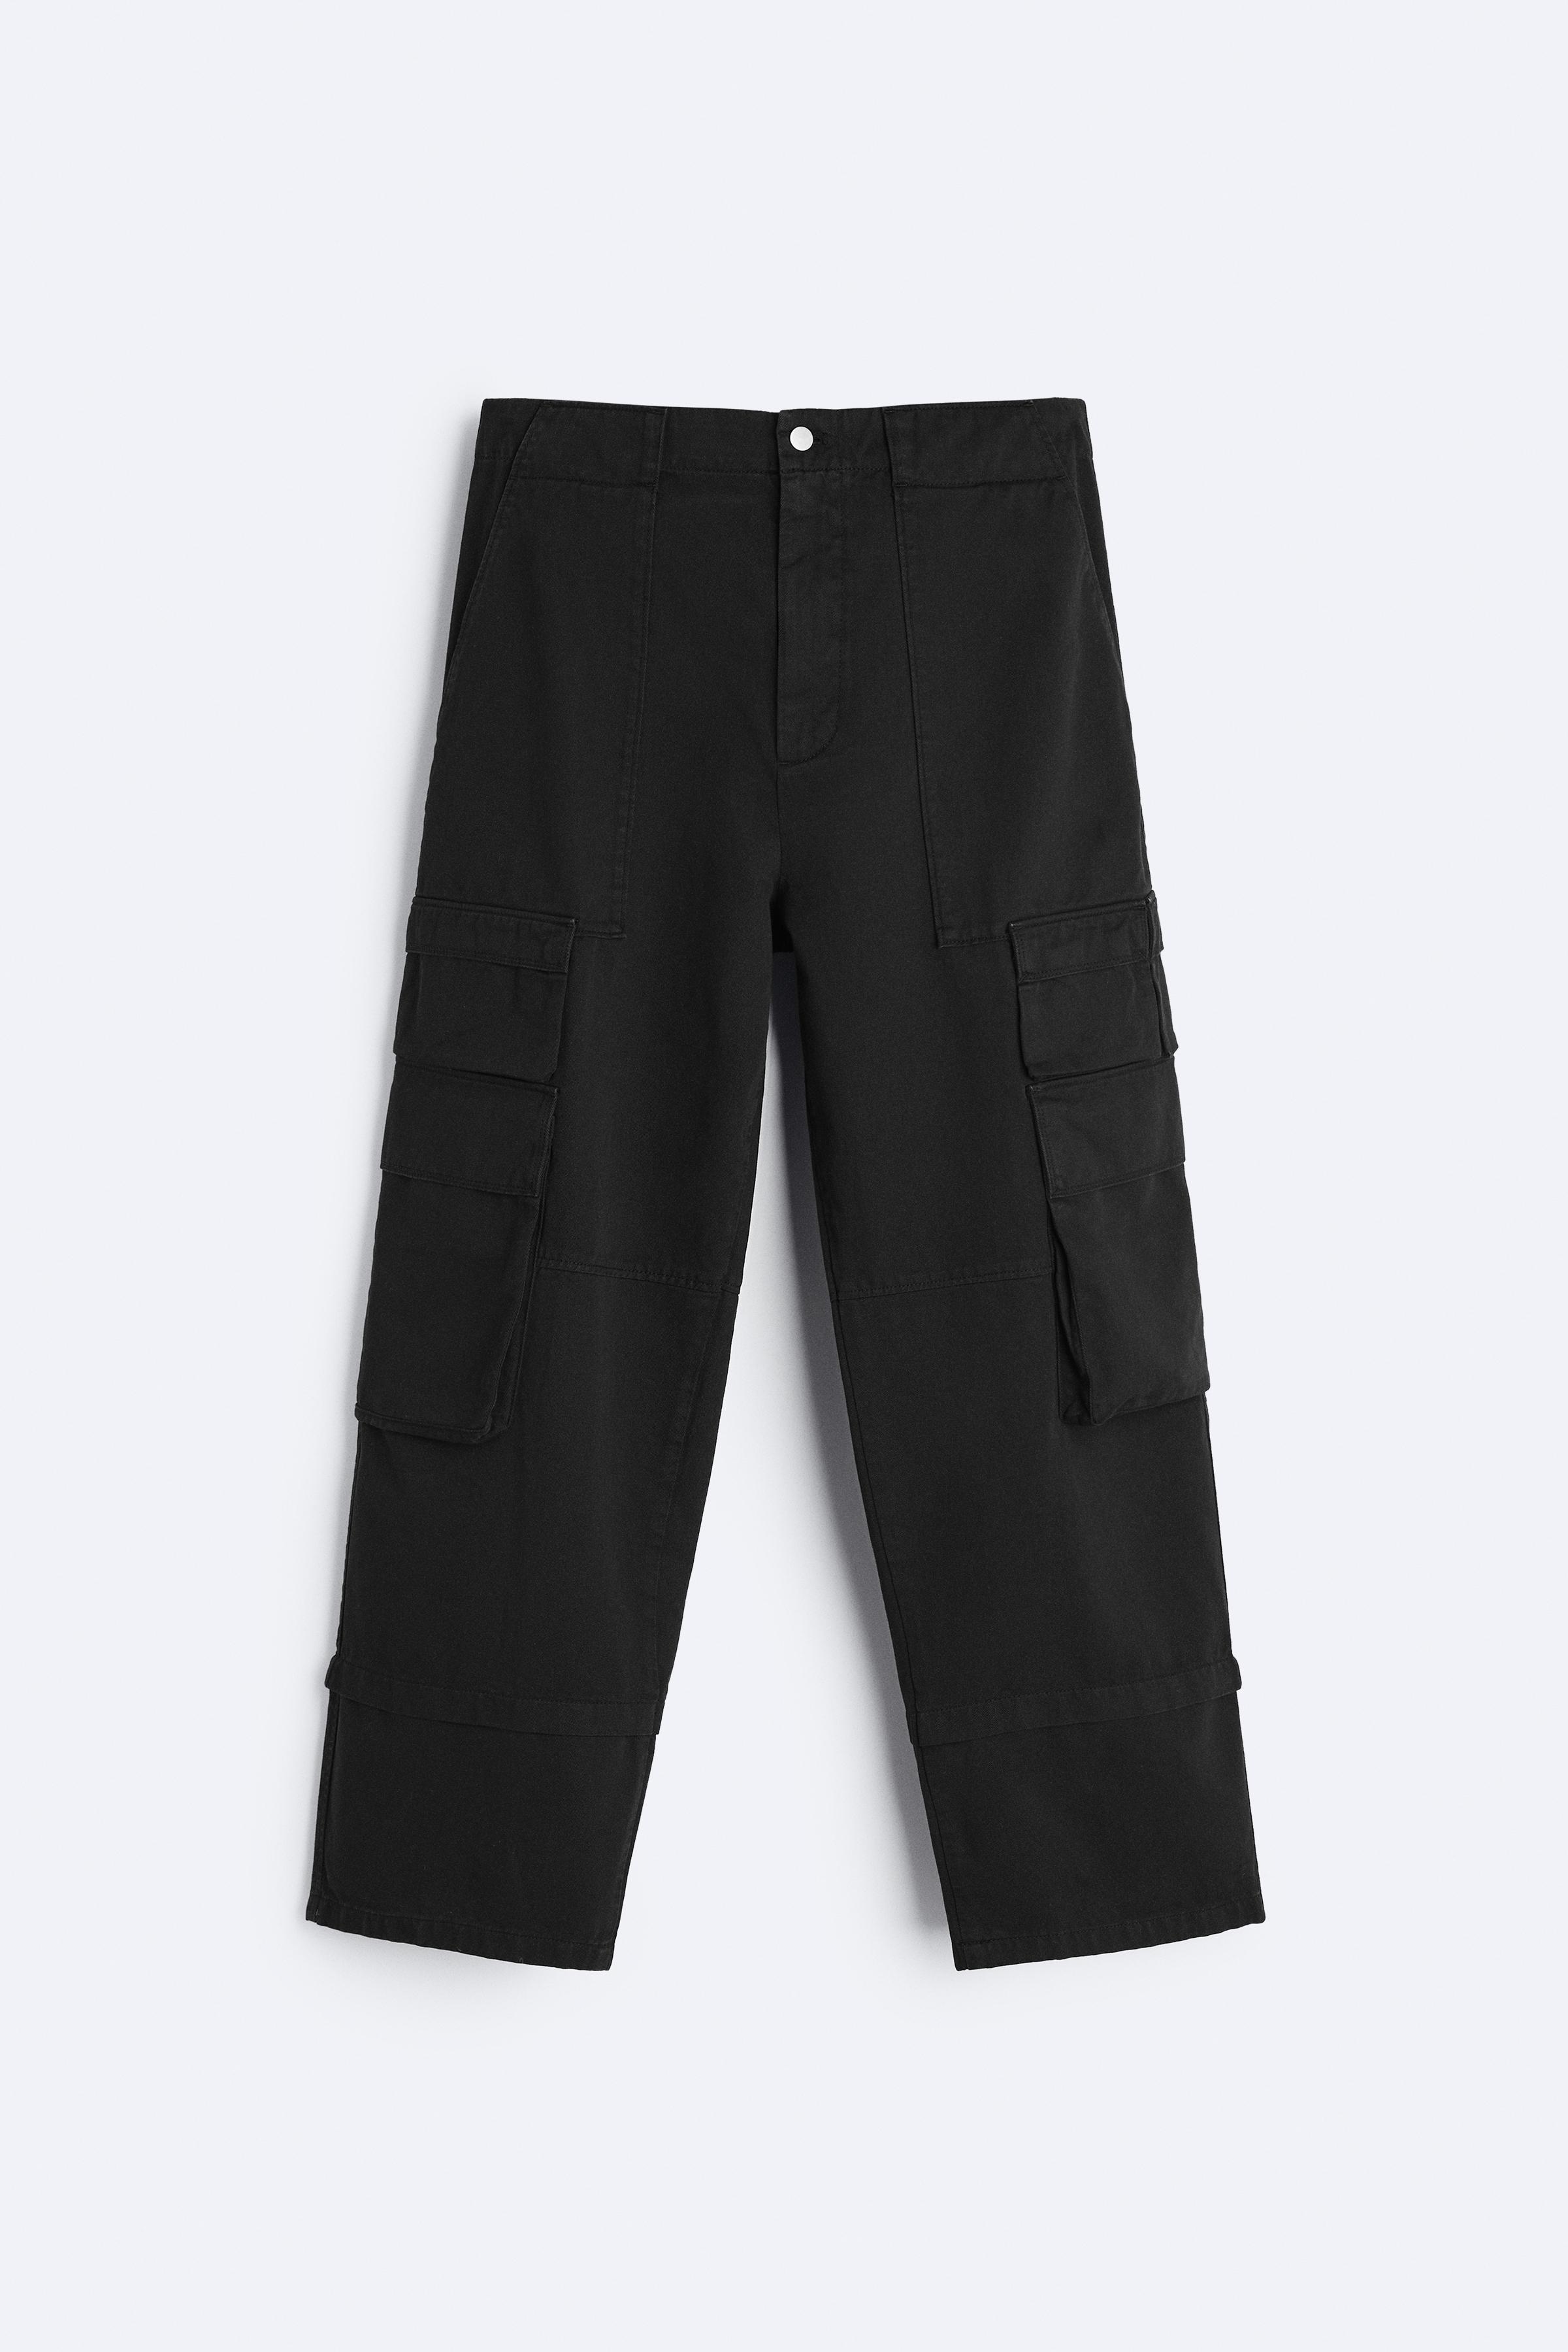 Remember these men's cargo pants from Zara?? Well they are back in stock in  multiple colors! Yay! I ended up buying only the black acid